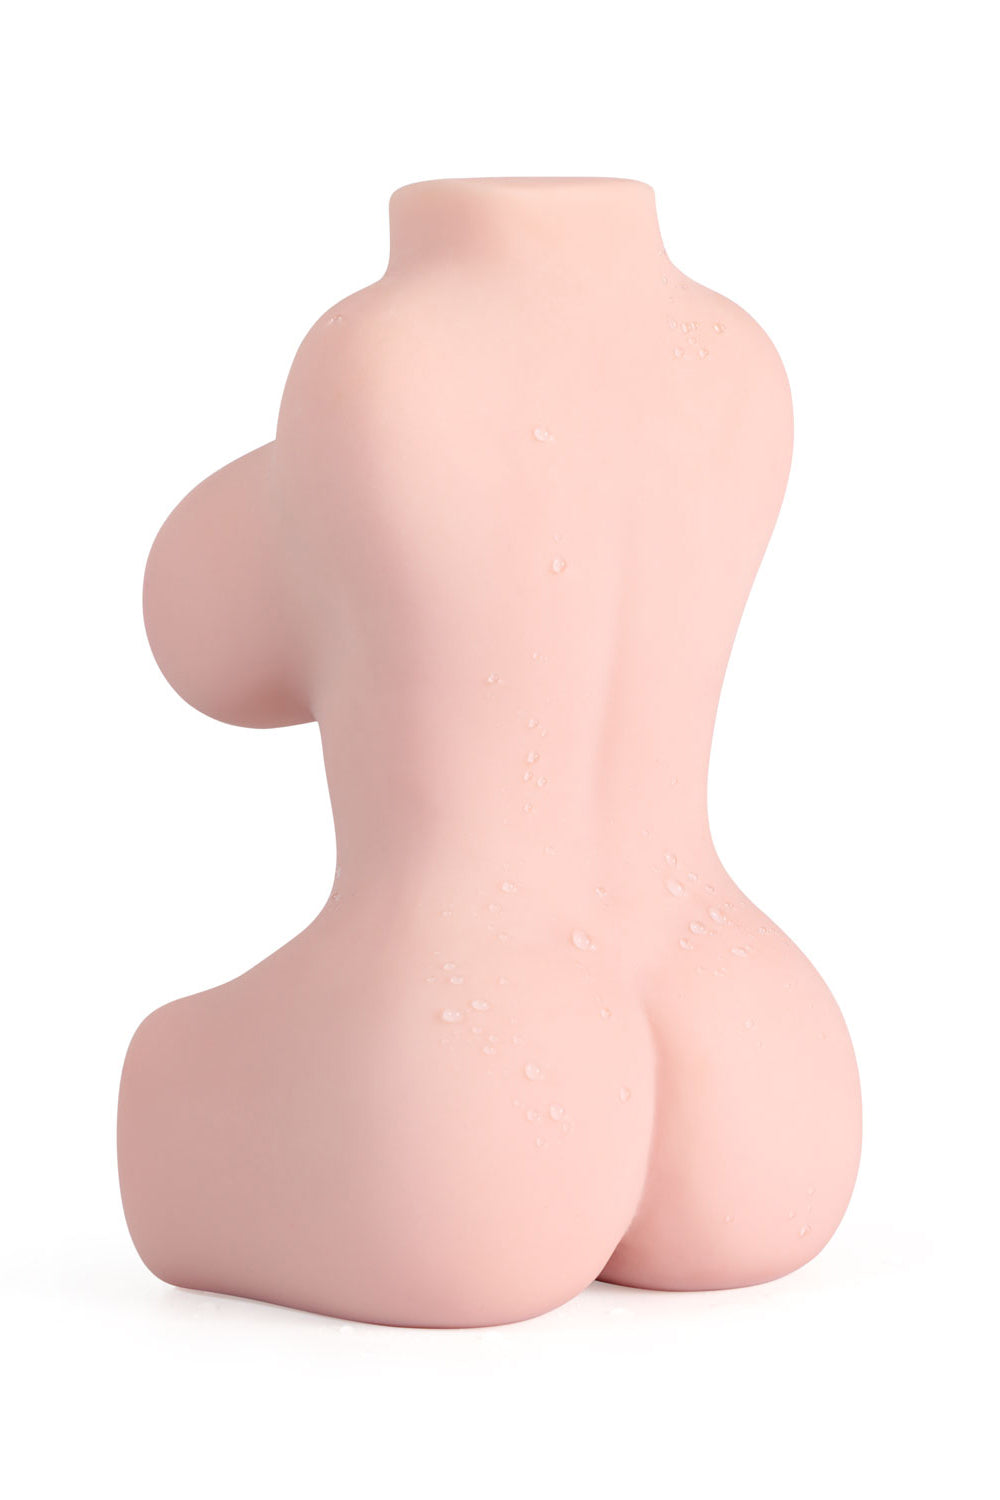 US Stock - TPE 5.5 lbs Realistic Cheap TPE Sex Doll Torso For Man